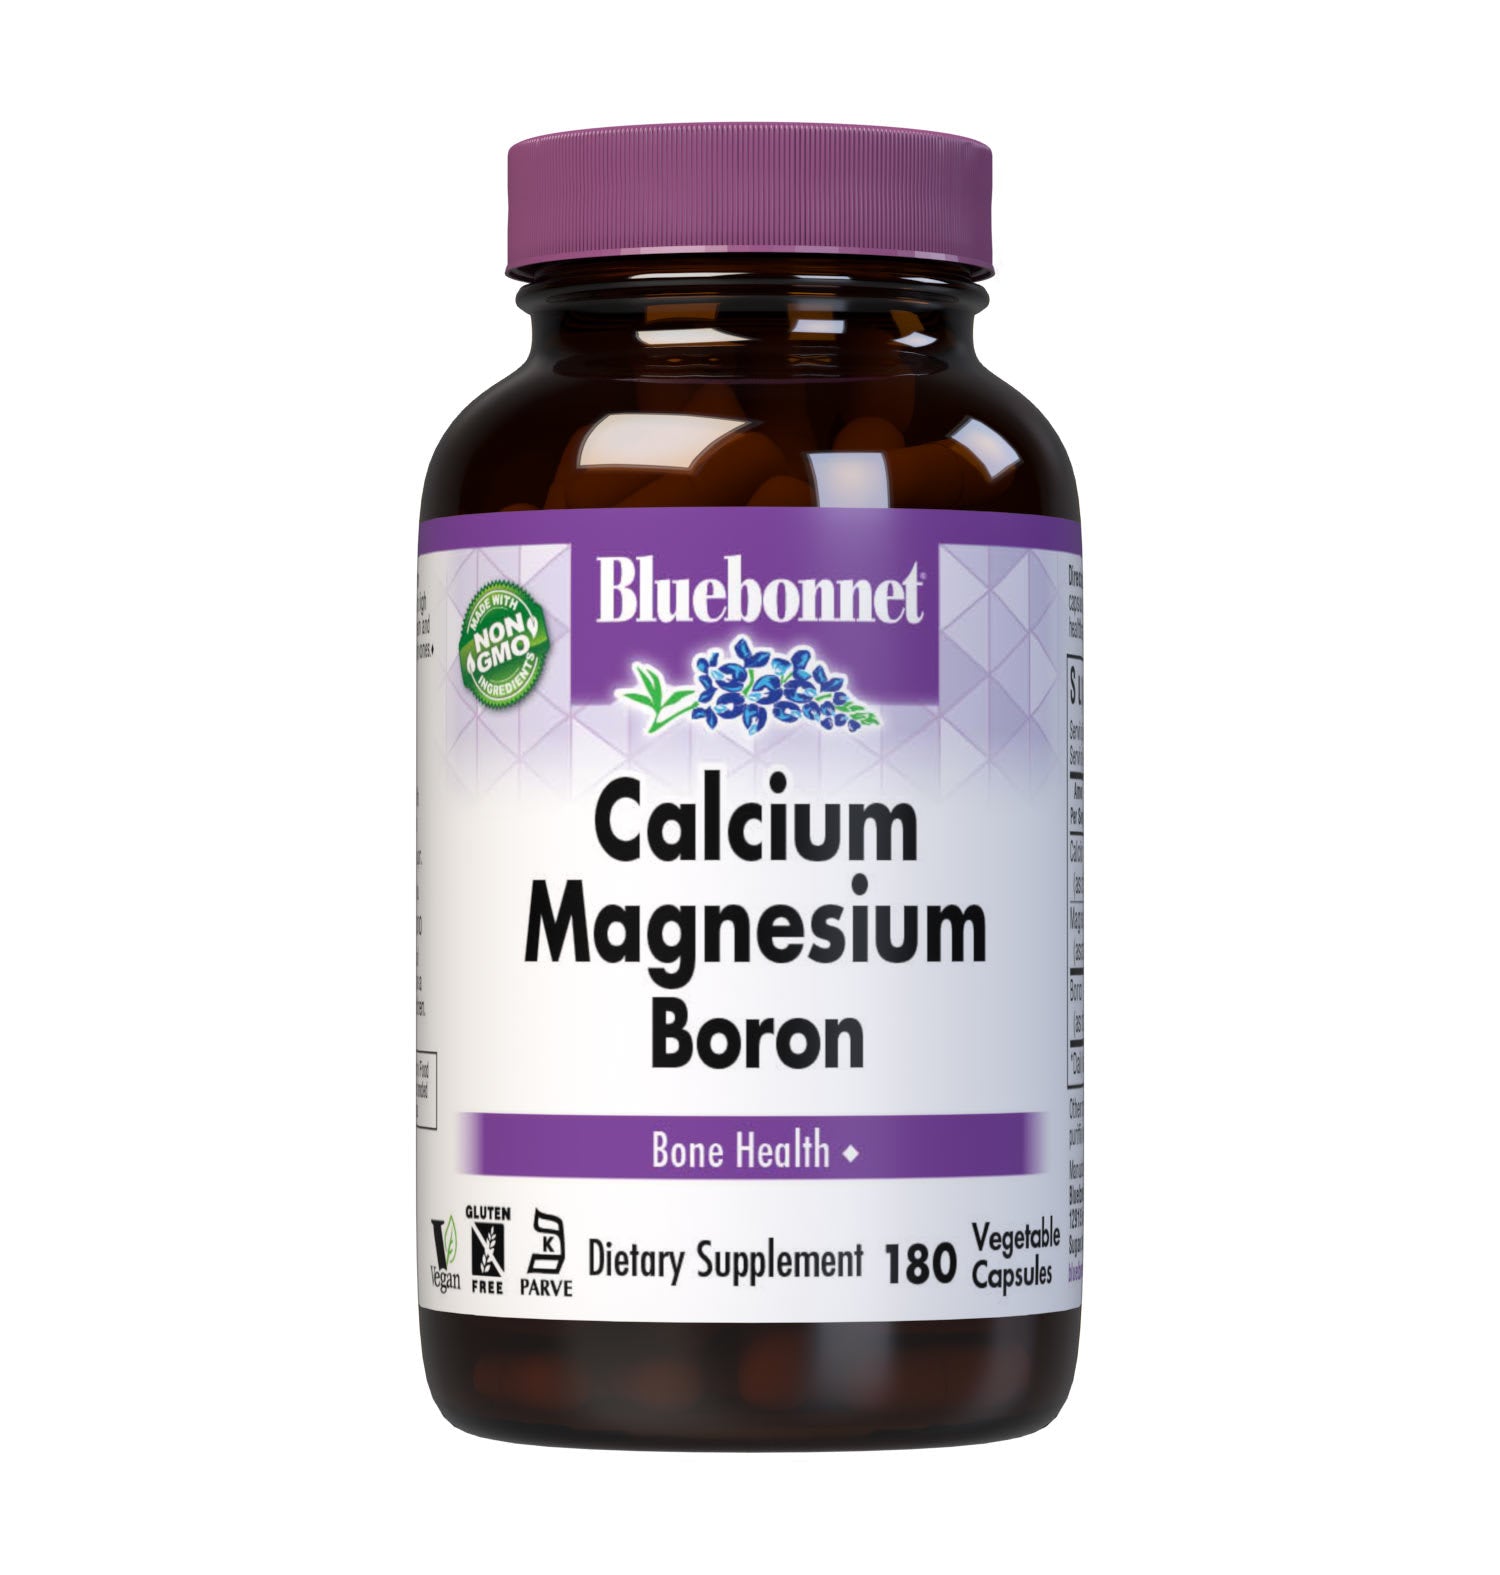 Bluebonnet's Calcium Magnesium Boron 180 Vegetable Capsules are specially formulated with a high potency combination of calcium, magnesium and the trace mineral boron for strong, healthy bones. #size_180 count